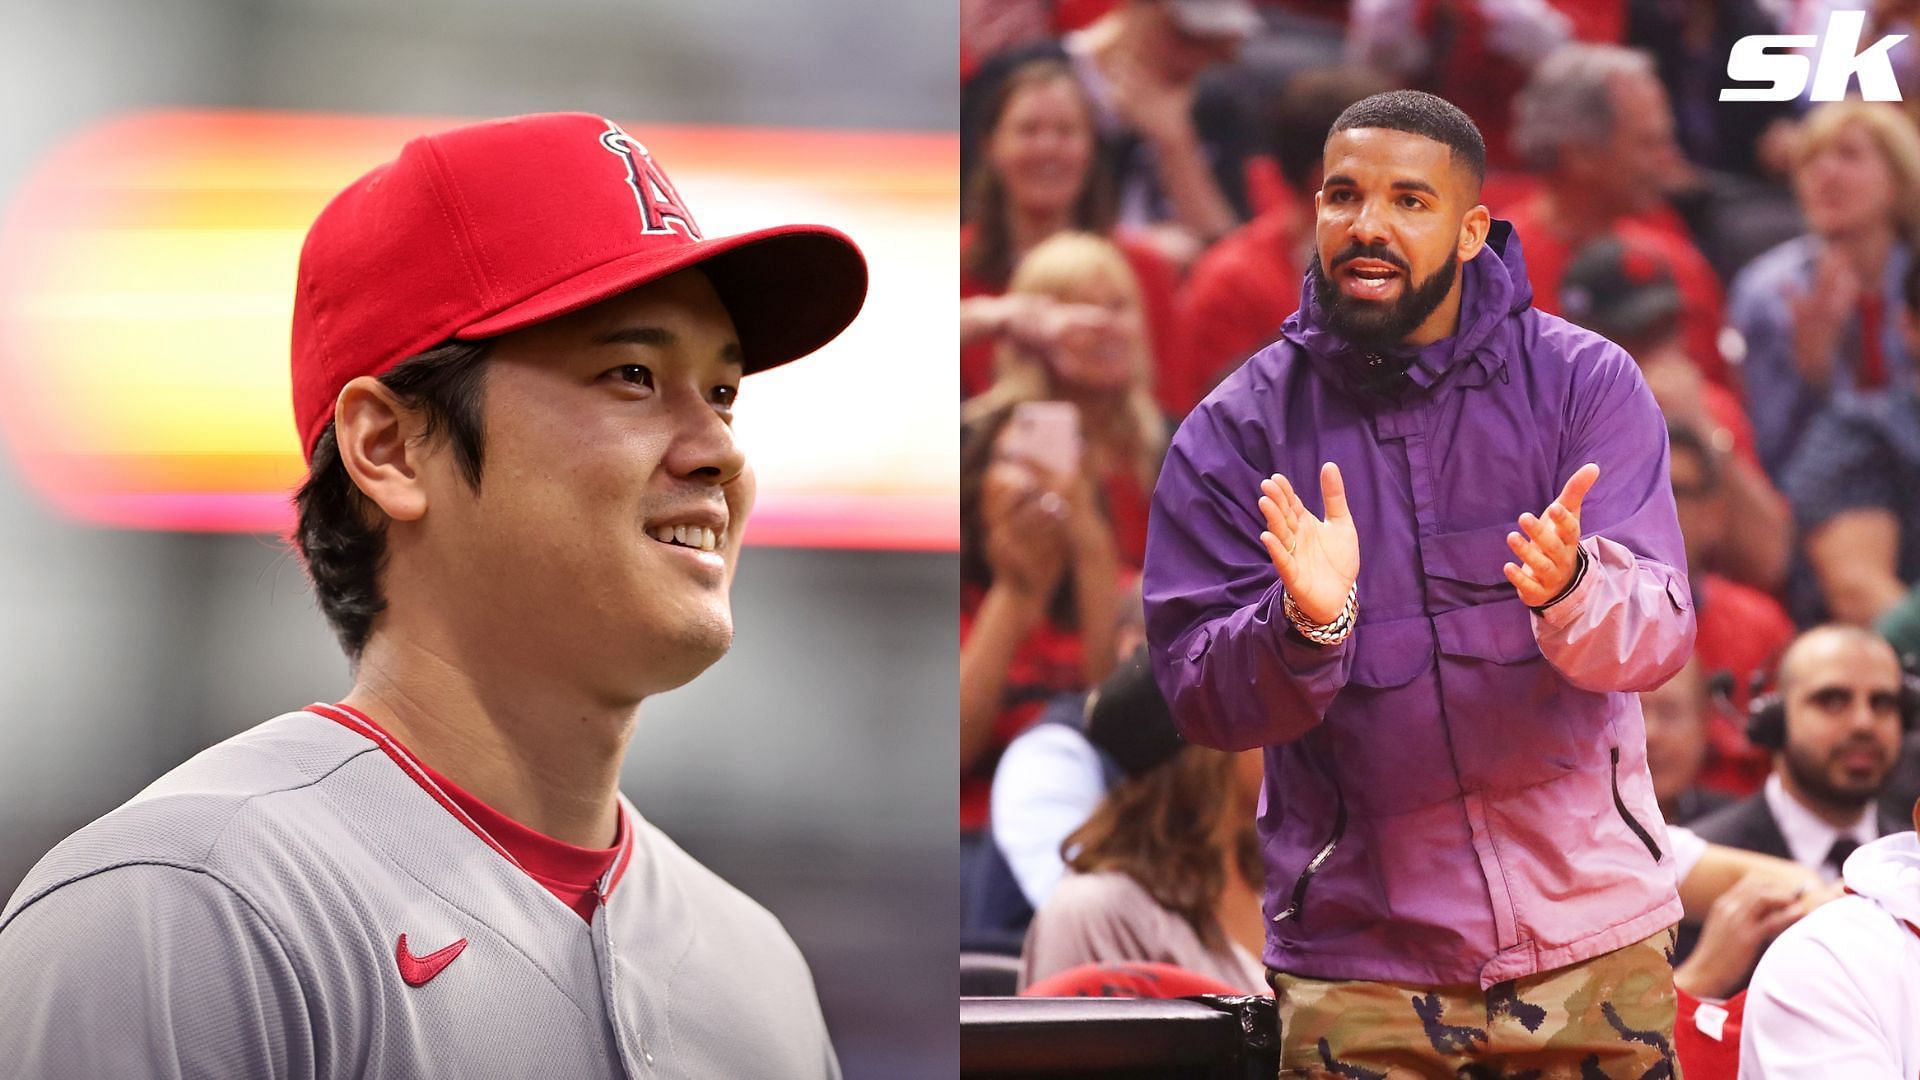 Drake turns heads in Shohei Ohtani's jersey: Fans unimpressed as